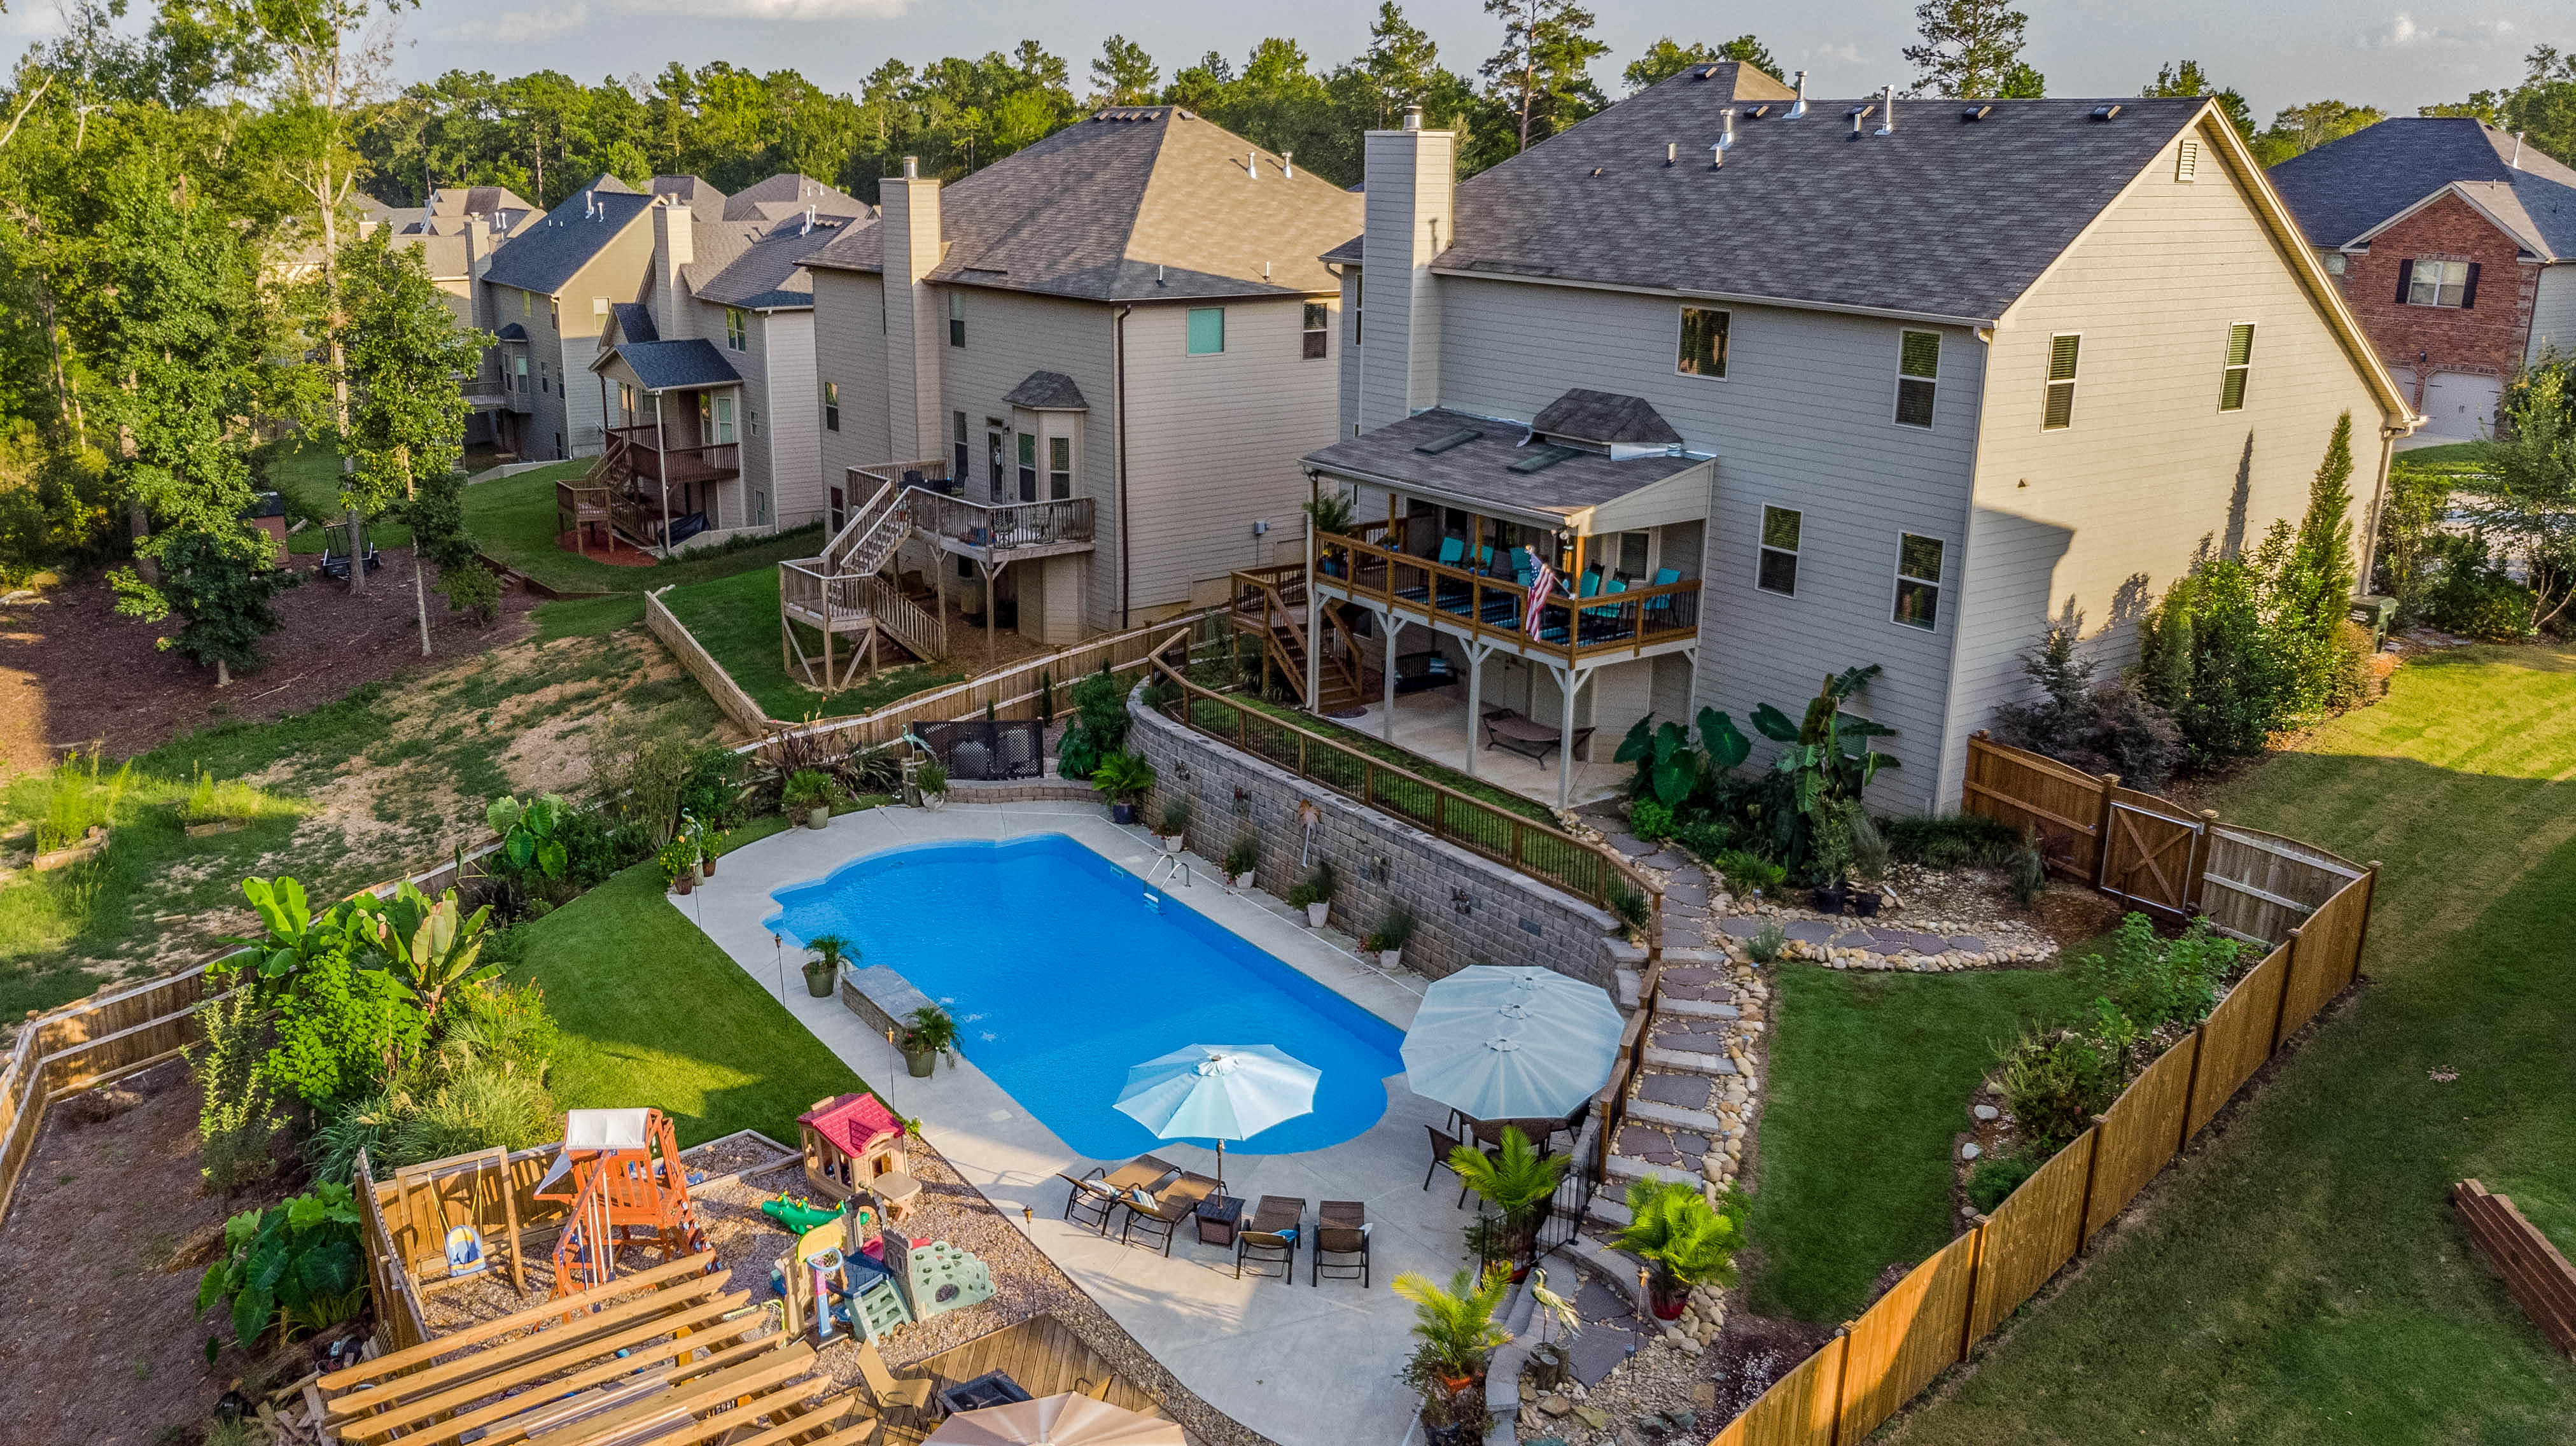 How much does a Pool add to my property value?